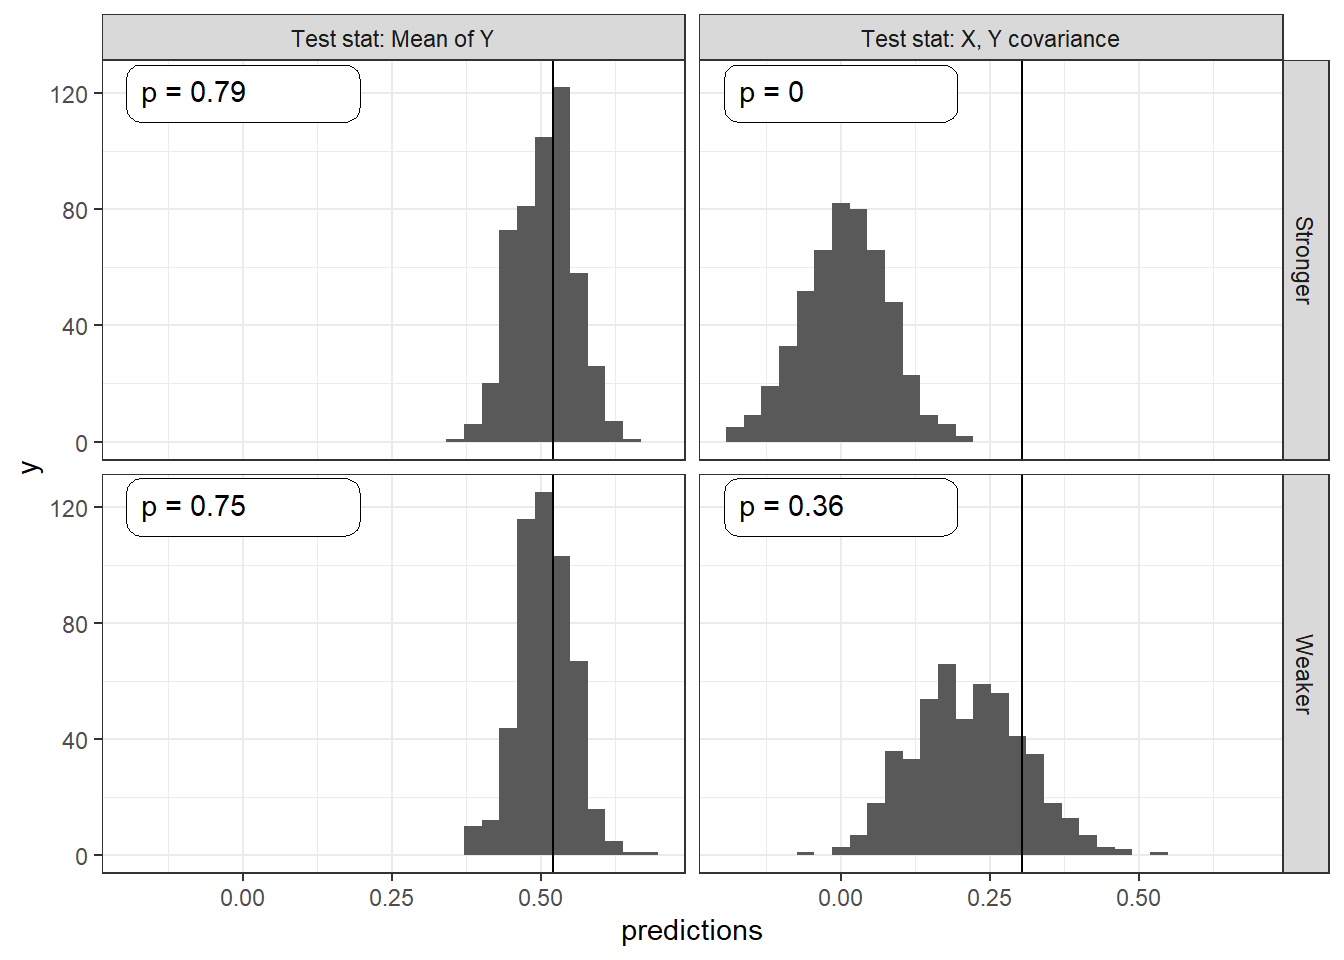 Bayesian $p$-values for different test statistics and models.